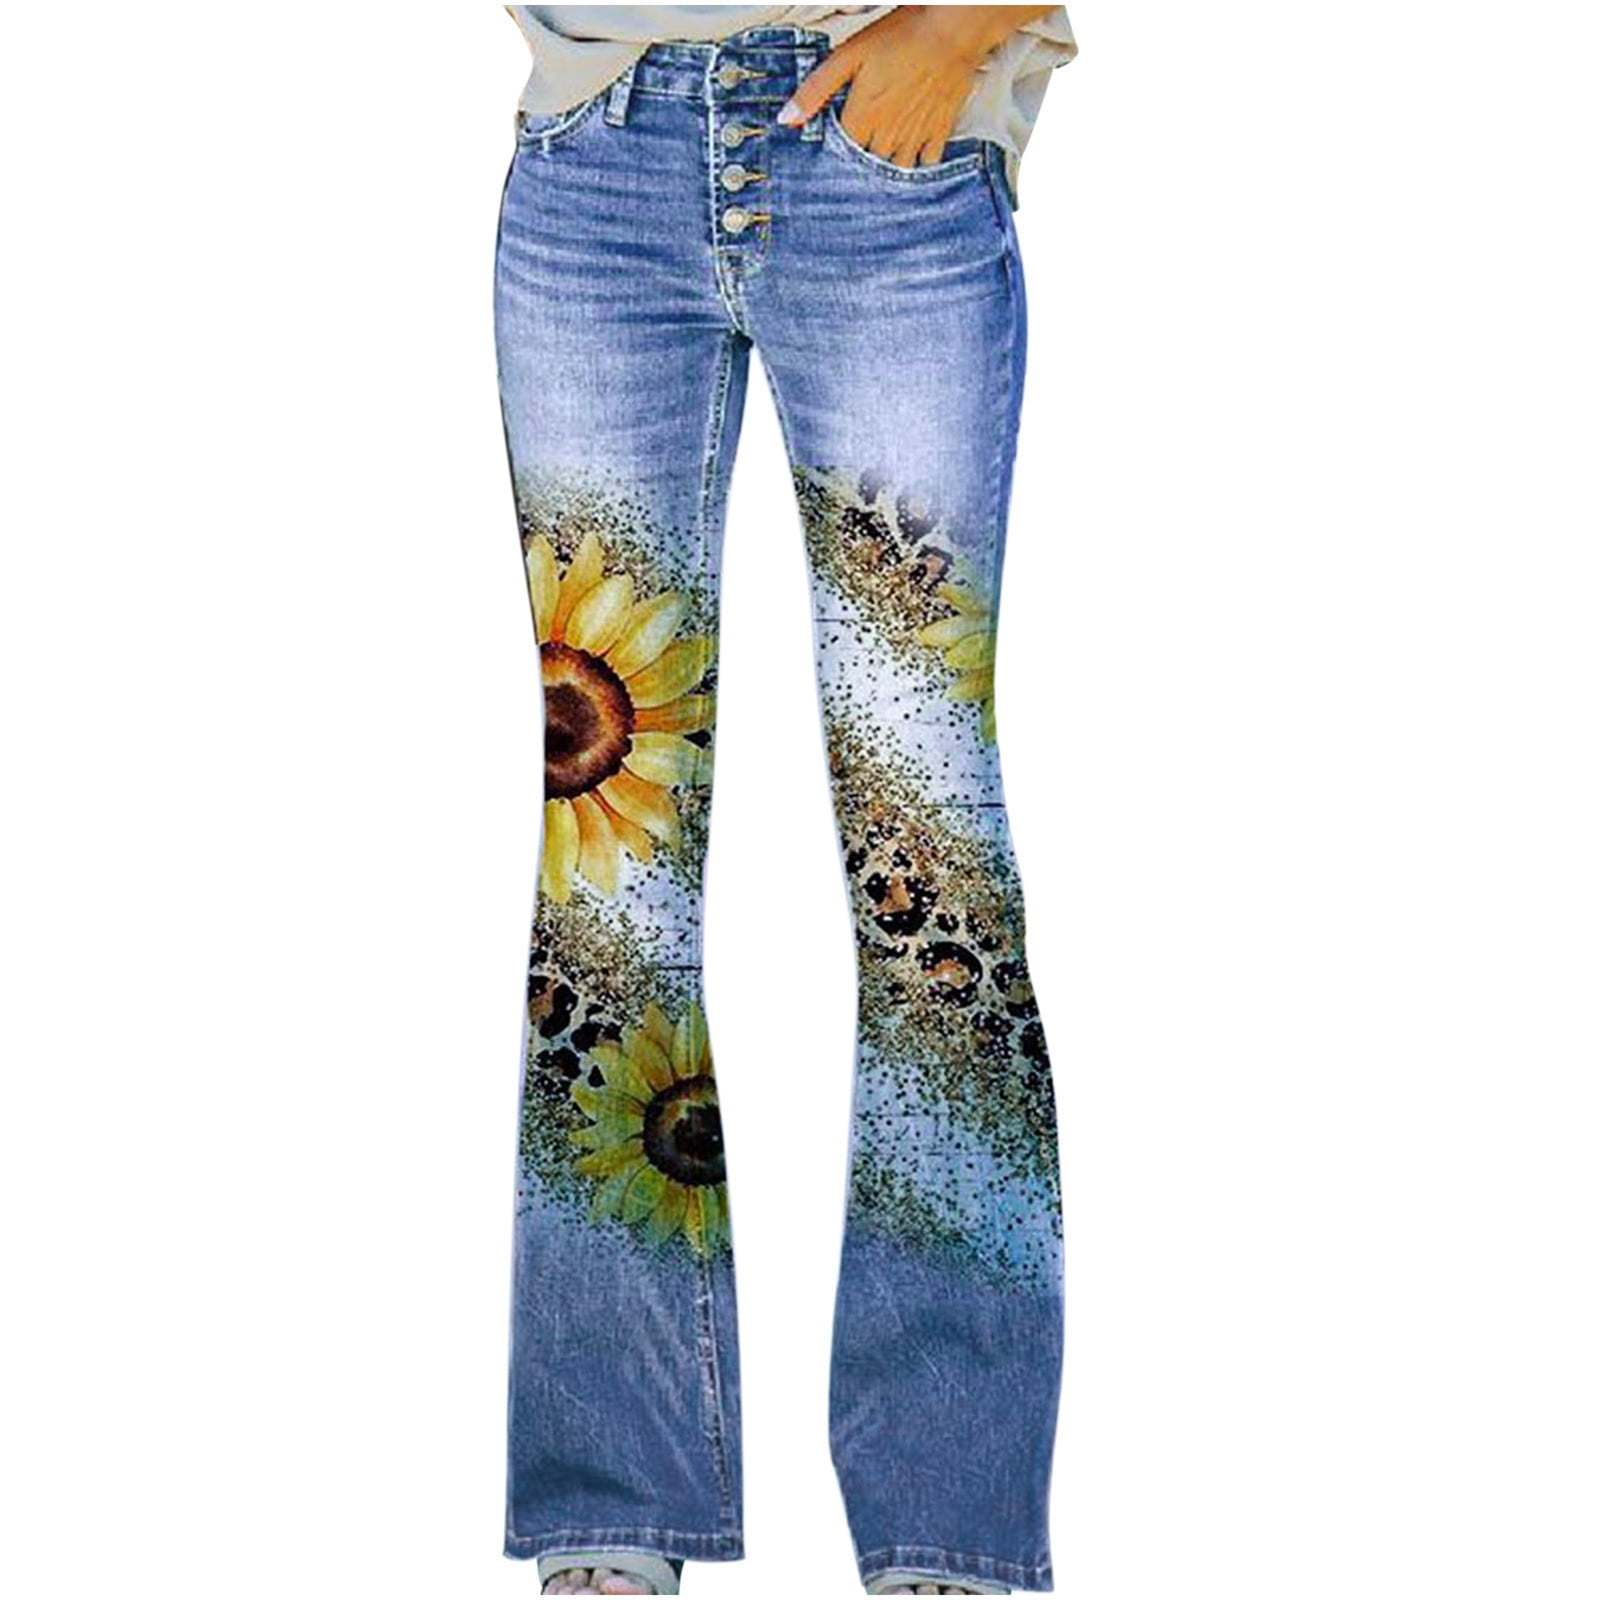 Women's Bootcut Jeans Stretchy Denim Pants Ladies Low Waist Flared